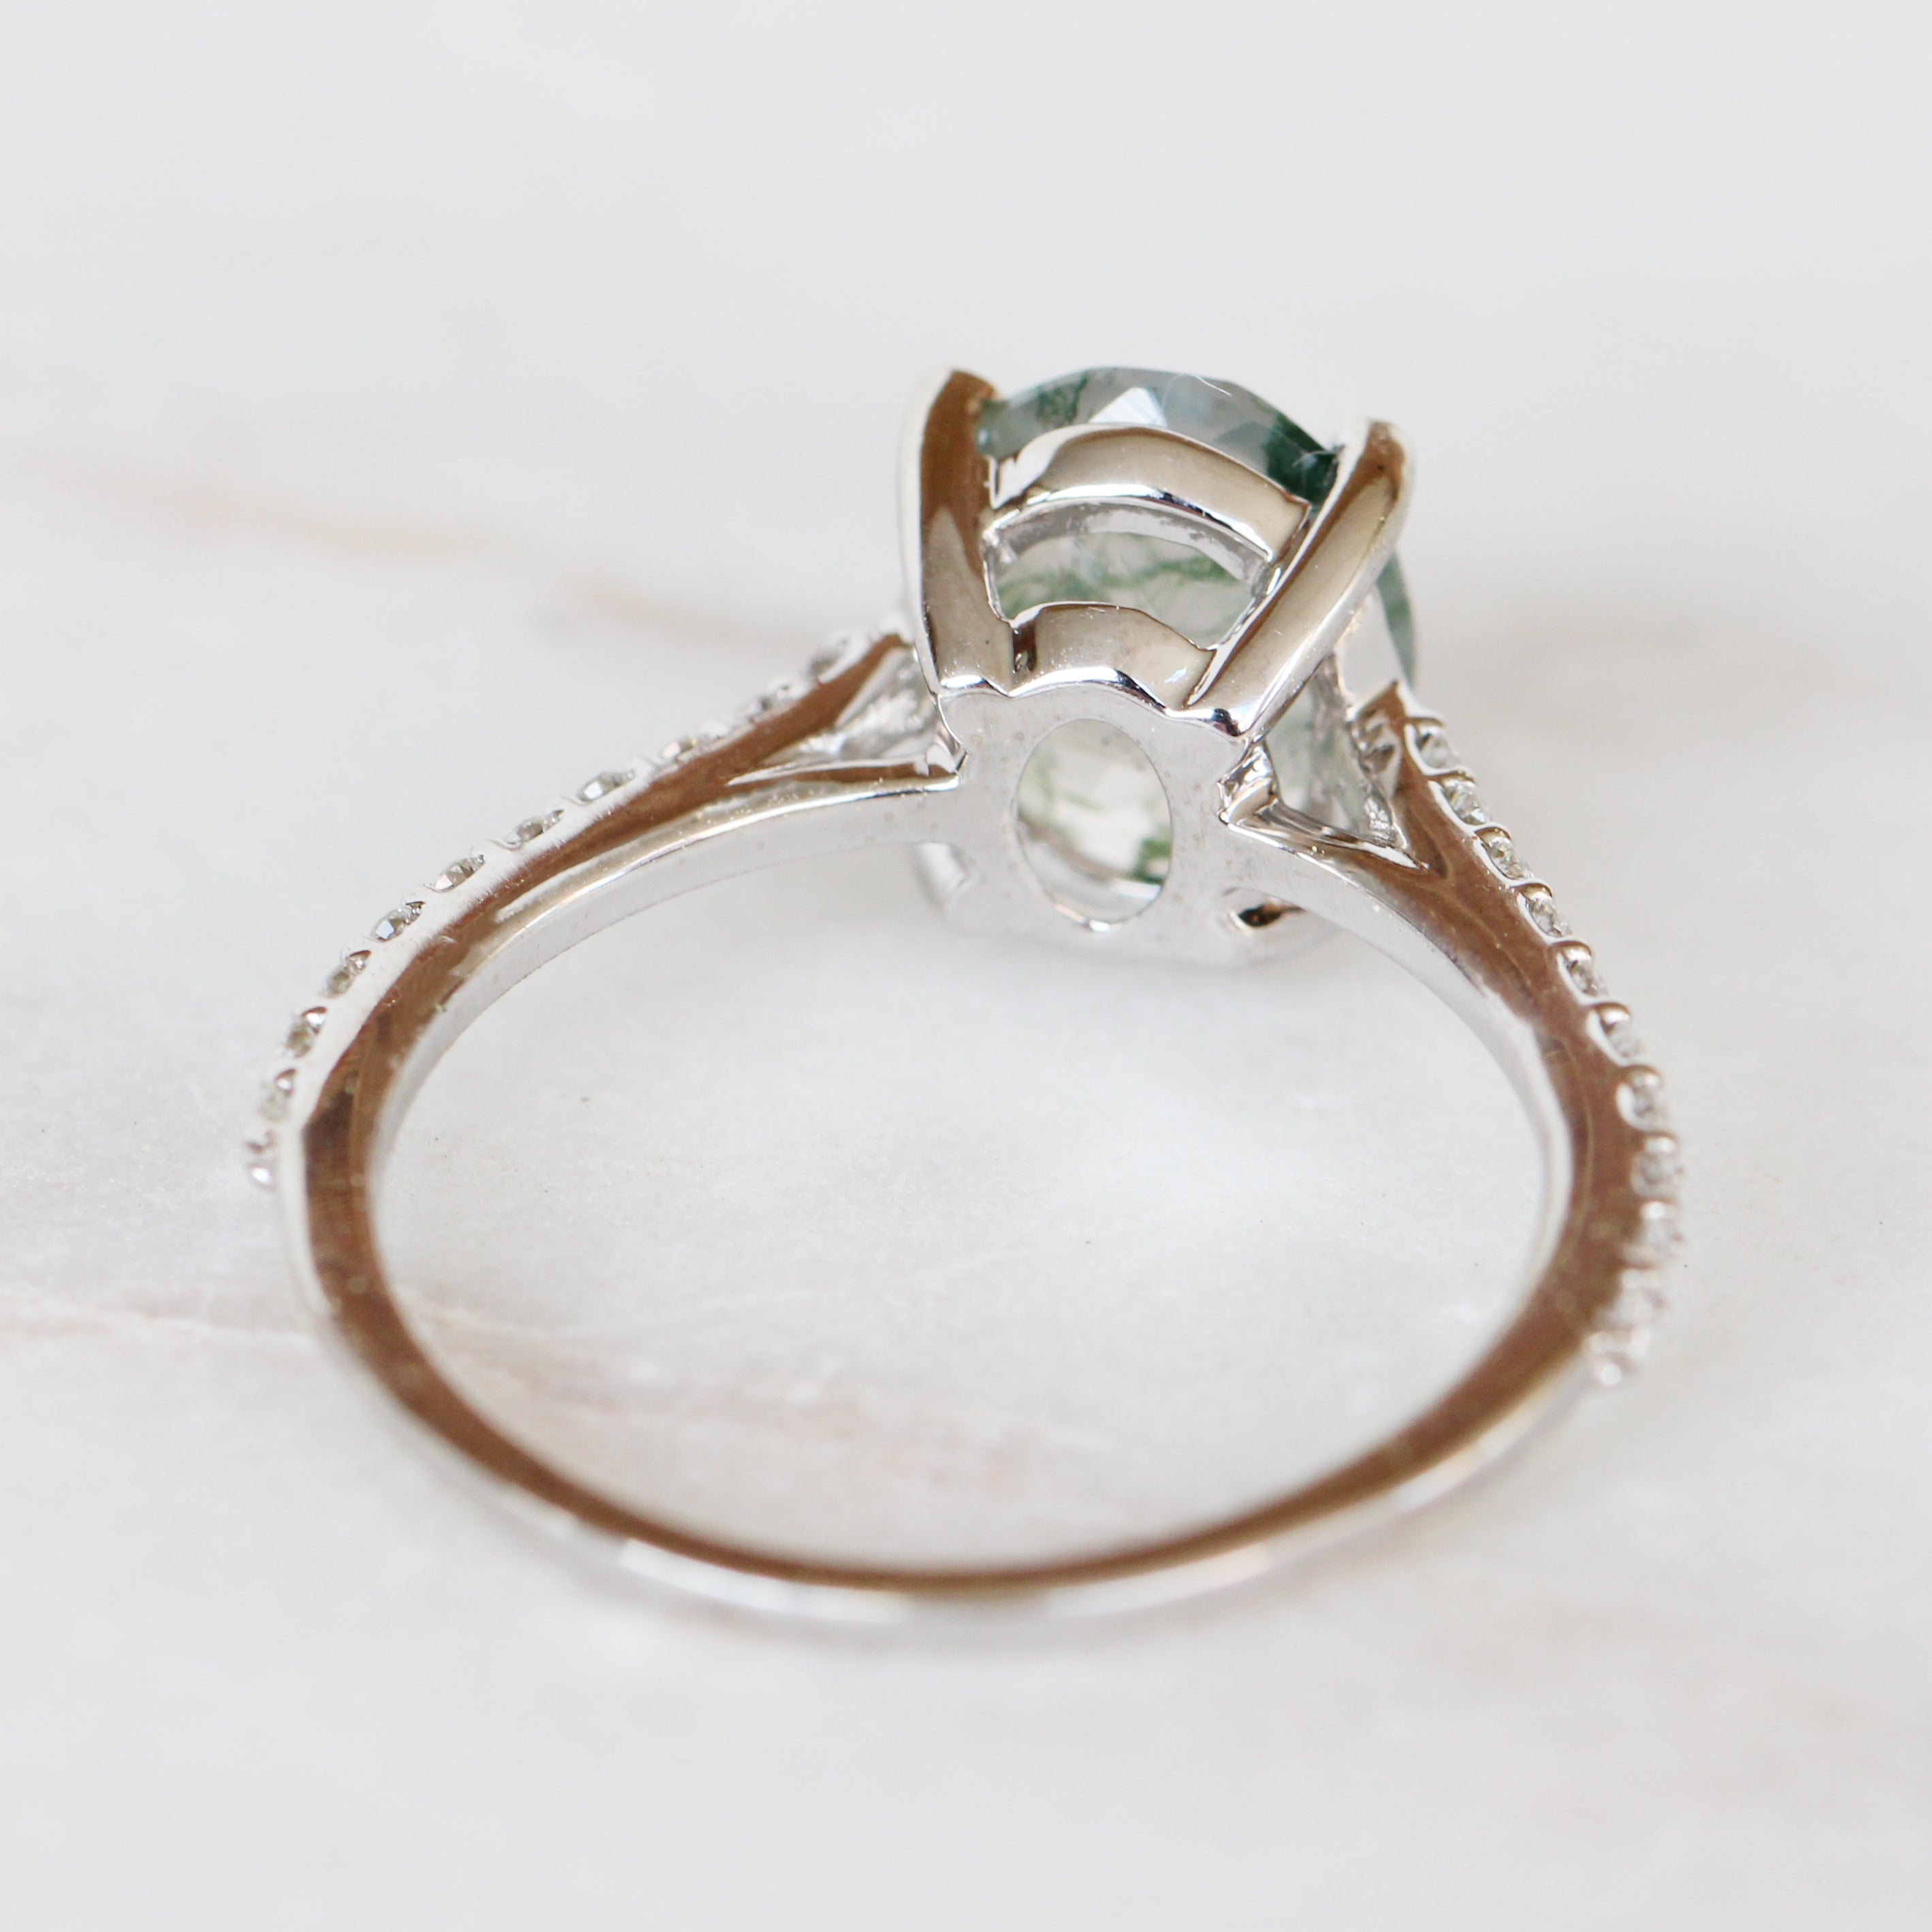 Raine Ring with a 2.06 Carat Moss Agate and Accent Diamonds in 14k White Gold - Ready to size and ship - Midwinter Co. Alternative Bridal Rings and Modern Fine Jewelry